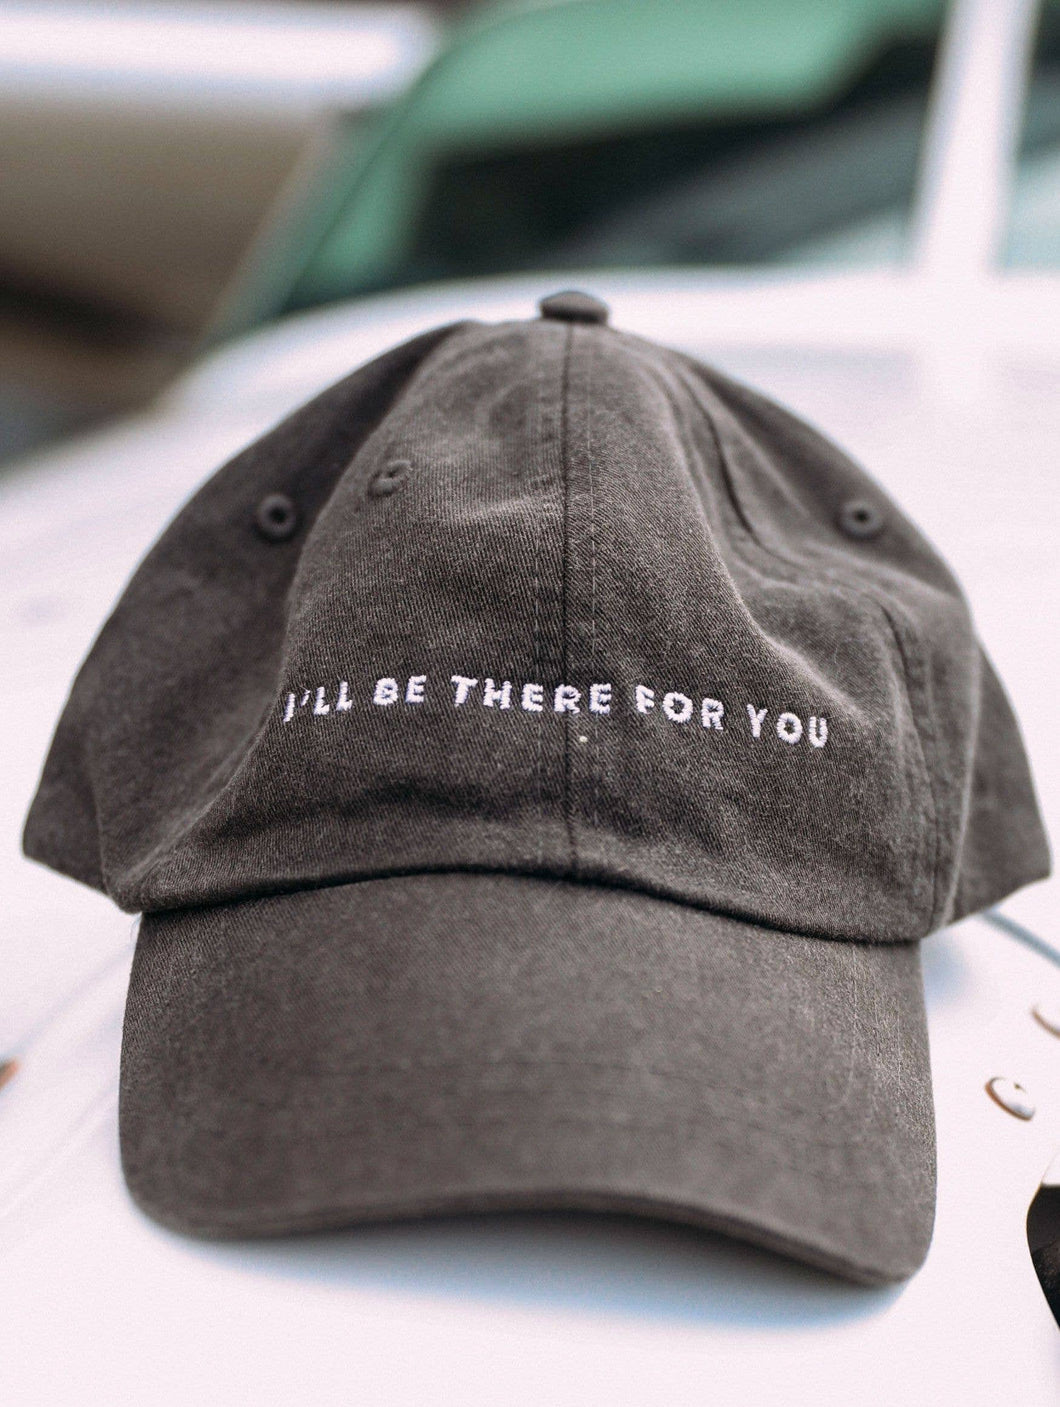 I'll be there for you hat